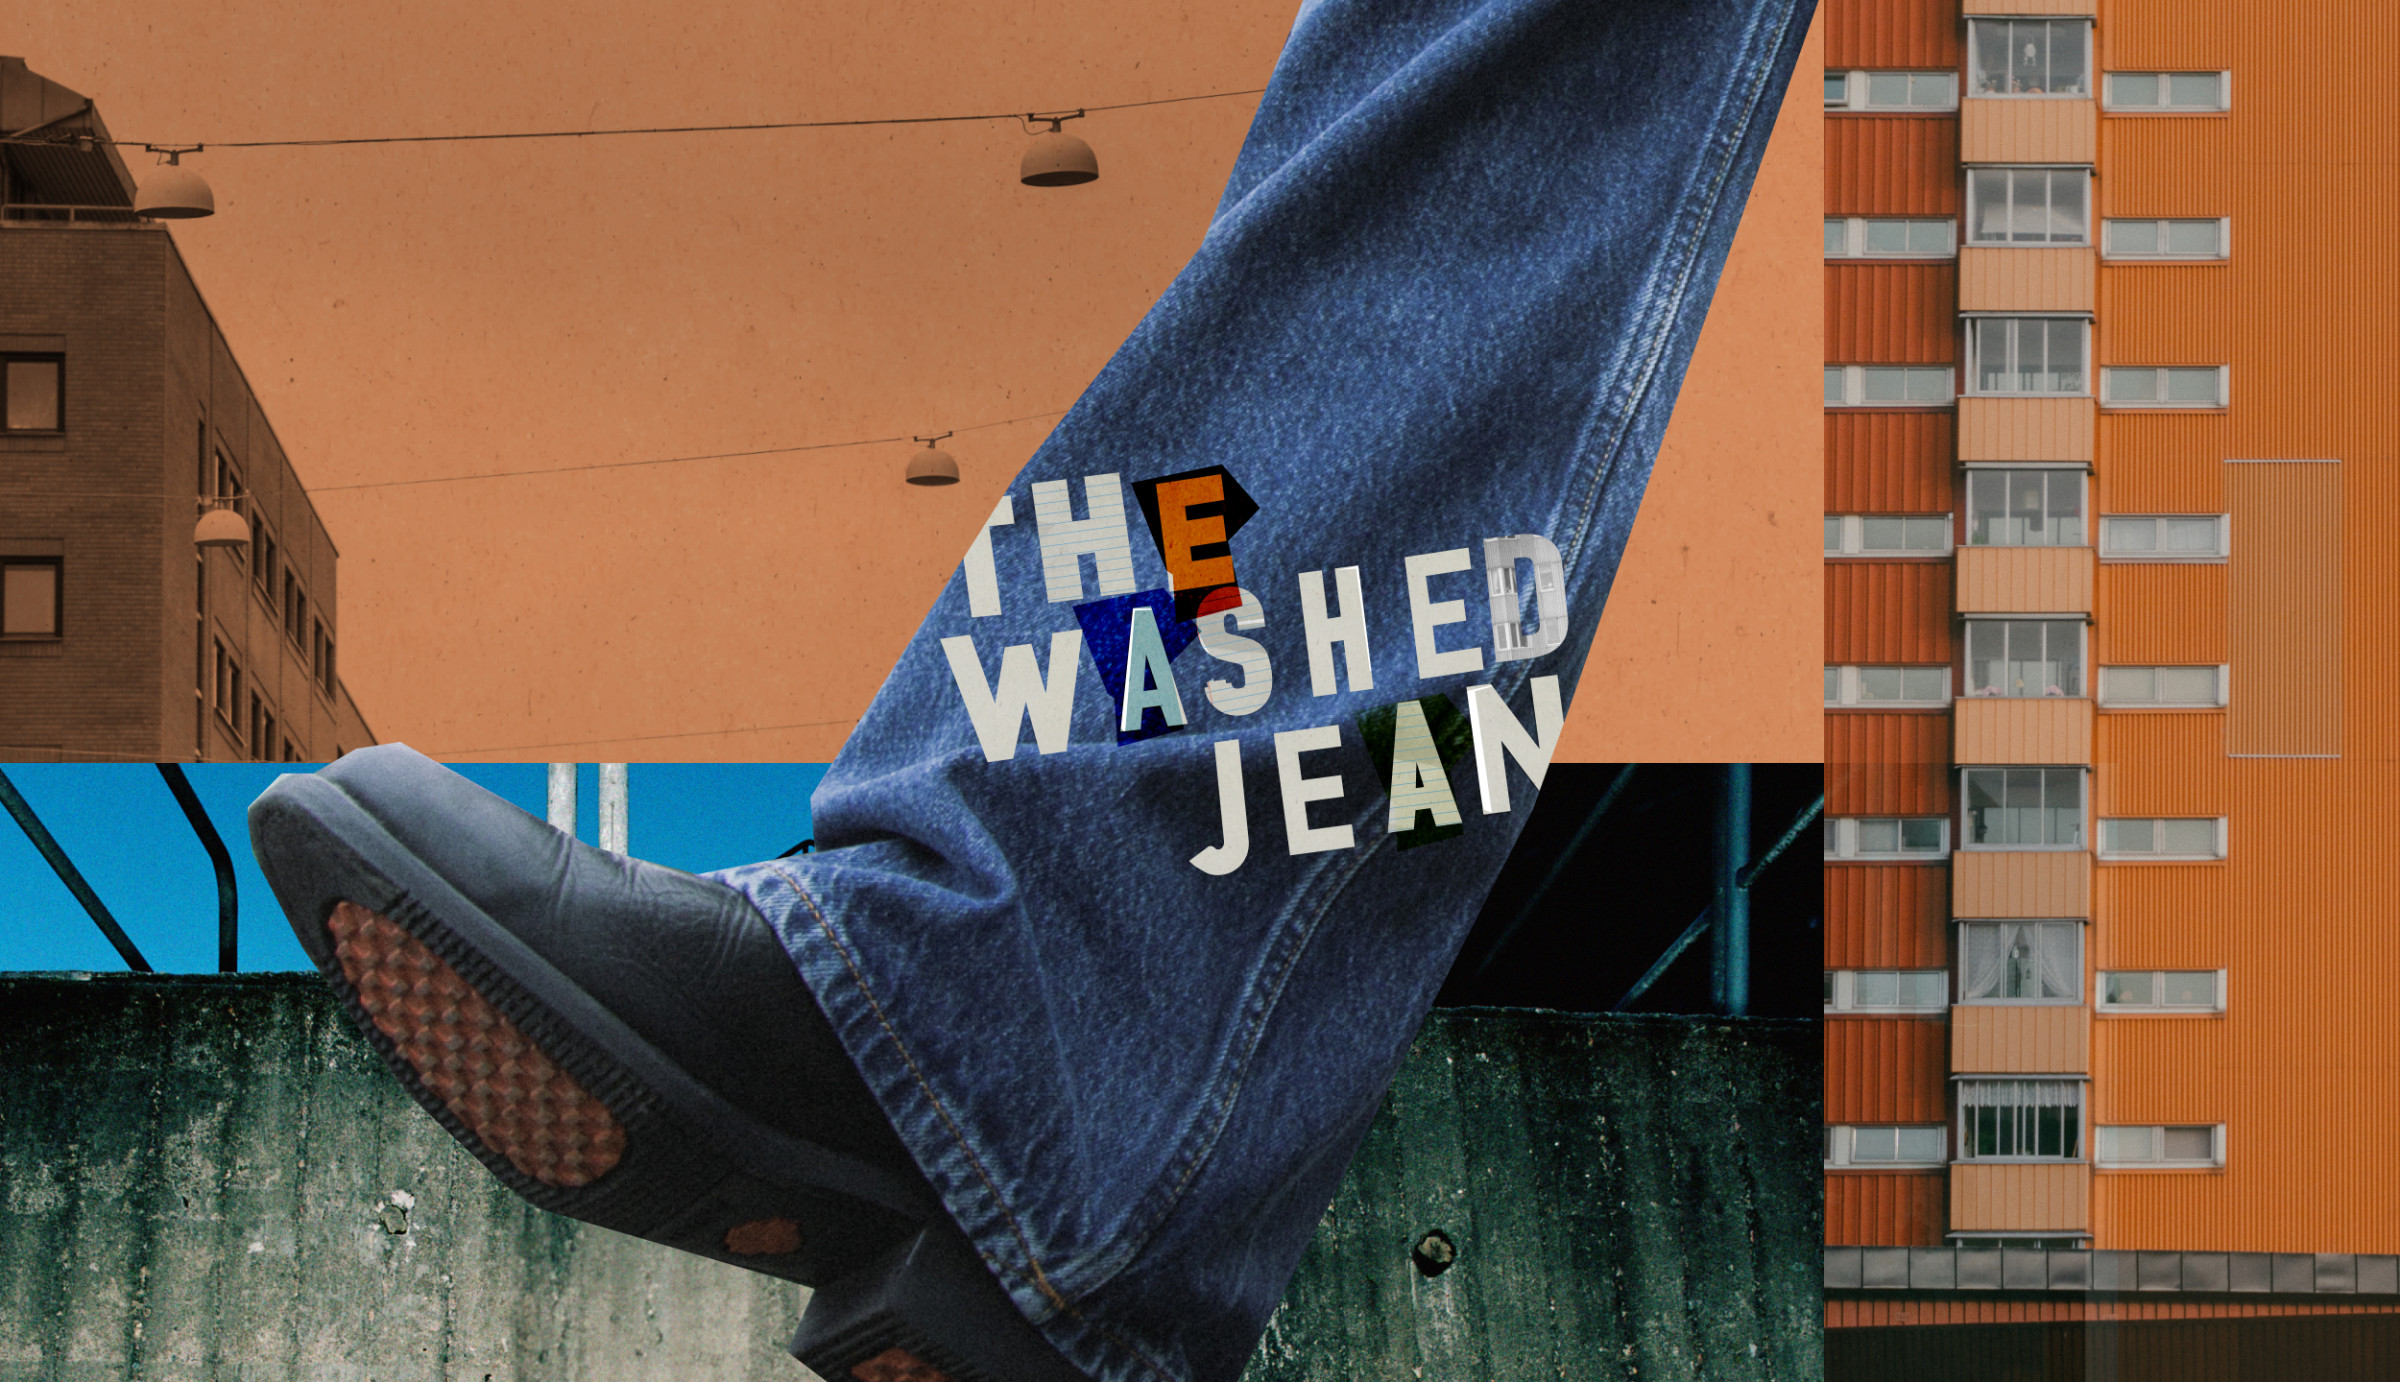 The washed jean women